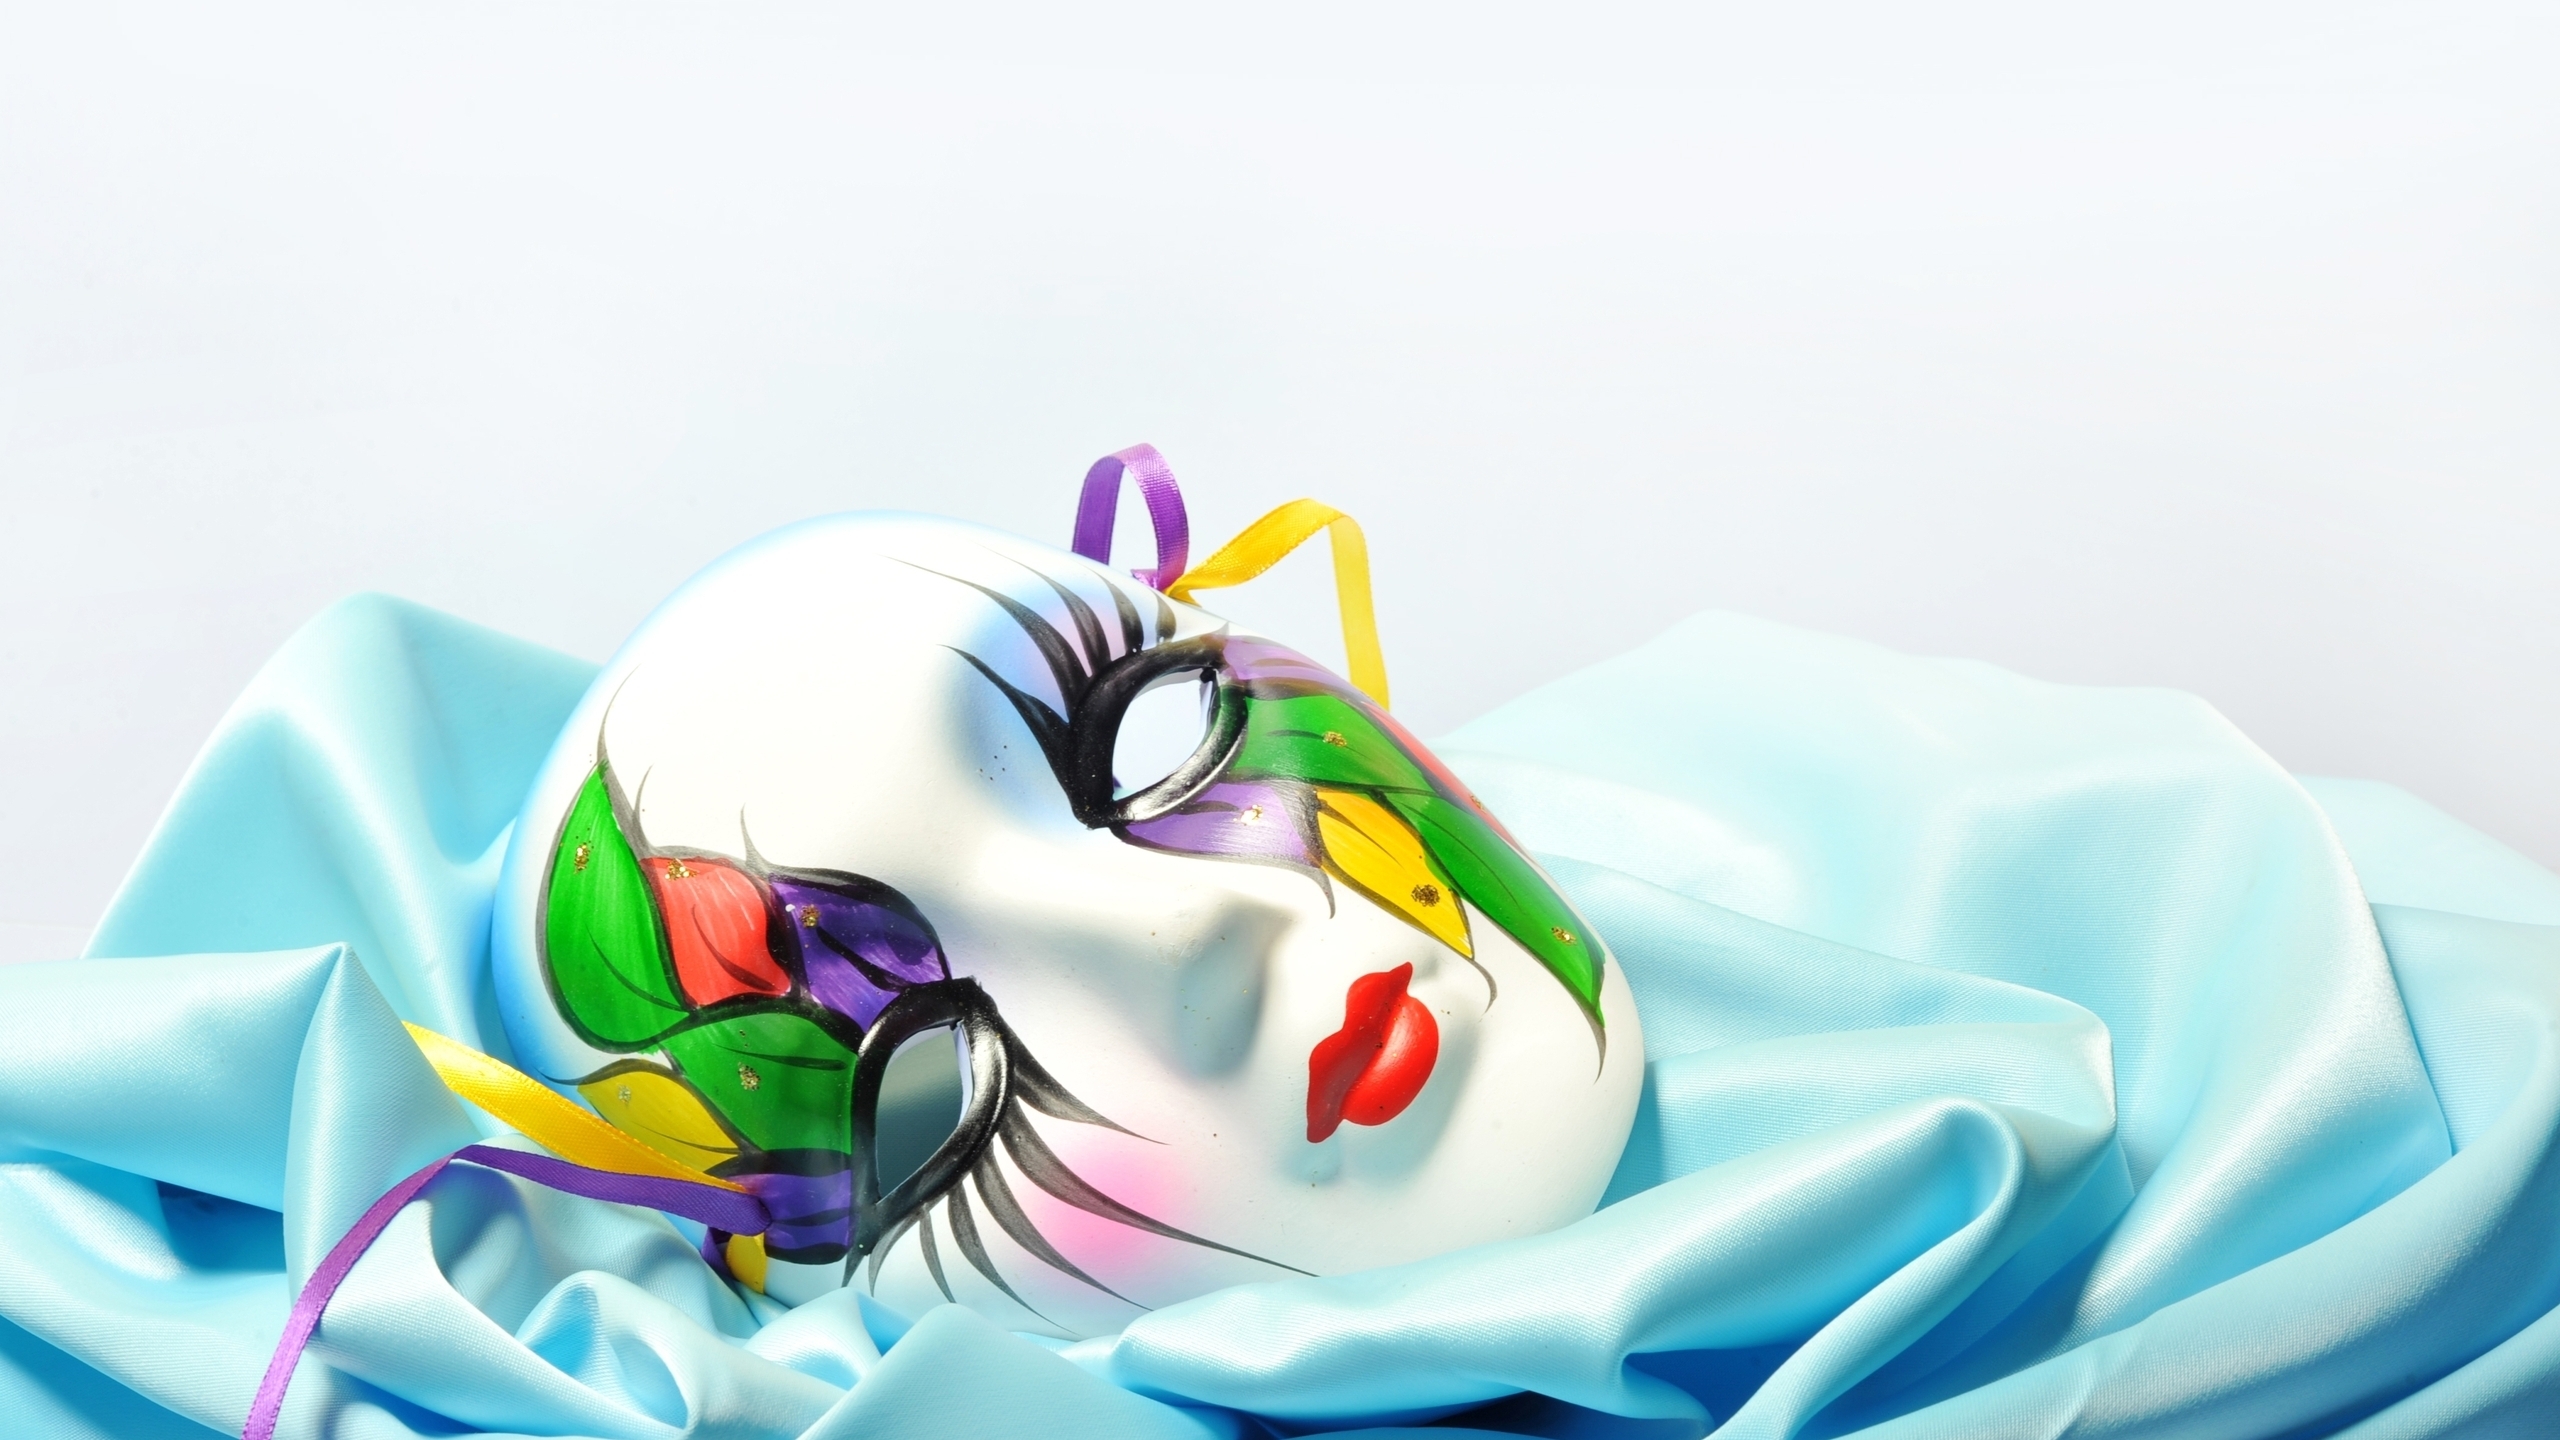 Lady Mask for 2560x1440 HDTV resolution